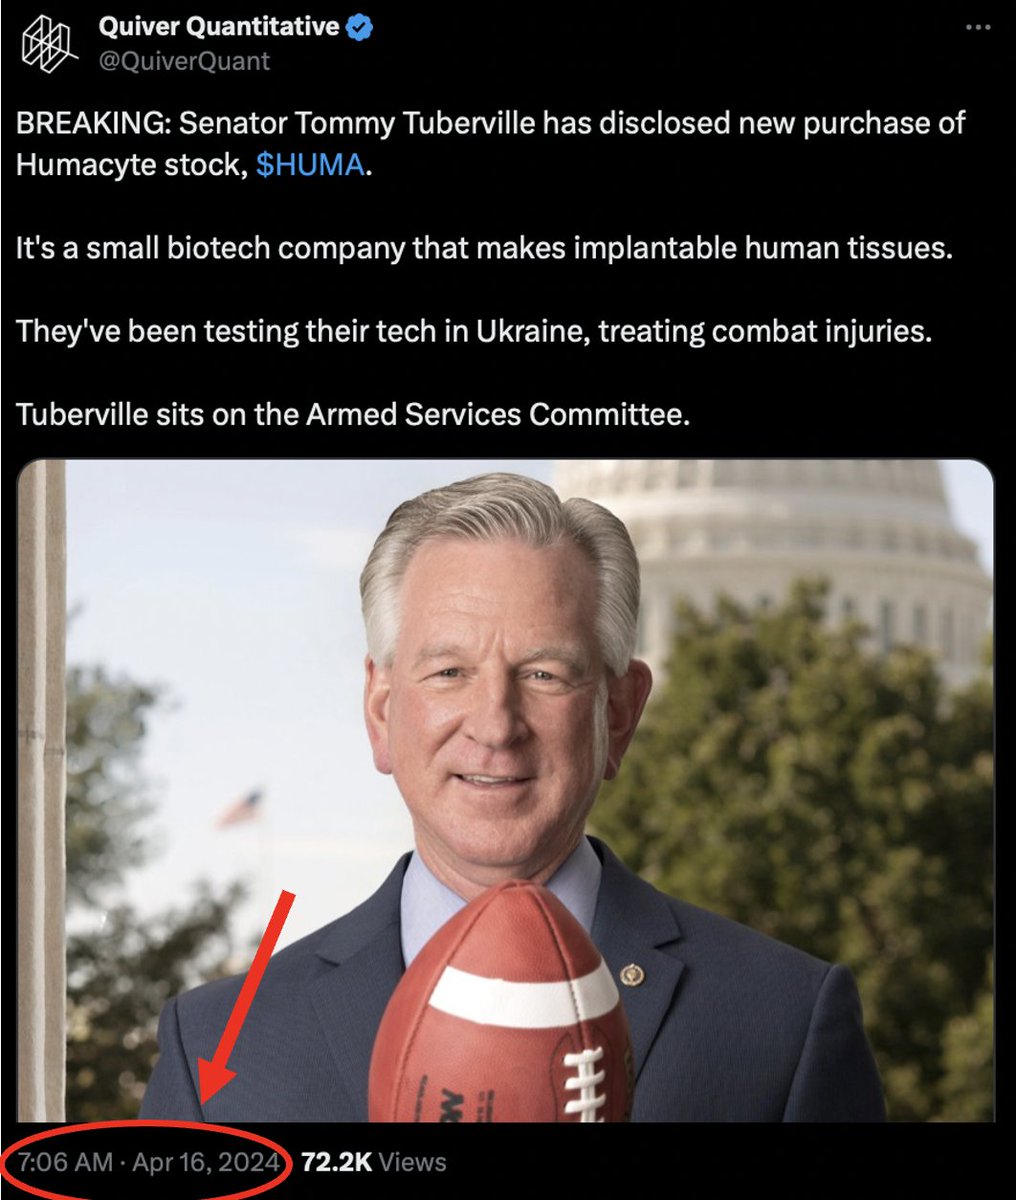 This keeps getting more ridiculous. Last month, I posted a report on a suspicious trade I noticed from Senator Tommy Tuberville. He bought stock in a company called Humacyte. The stock has now risen over 67% since then. Humacyte is a small biotech company that makes…